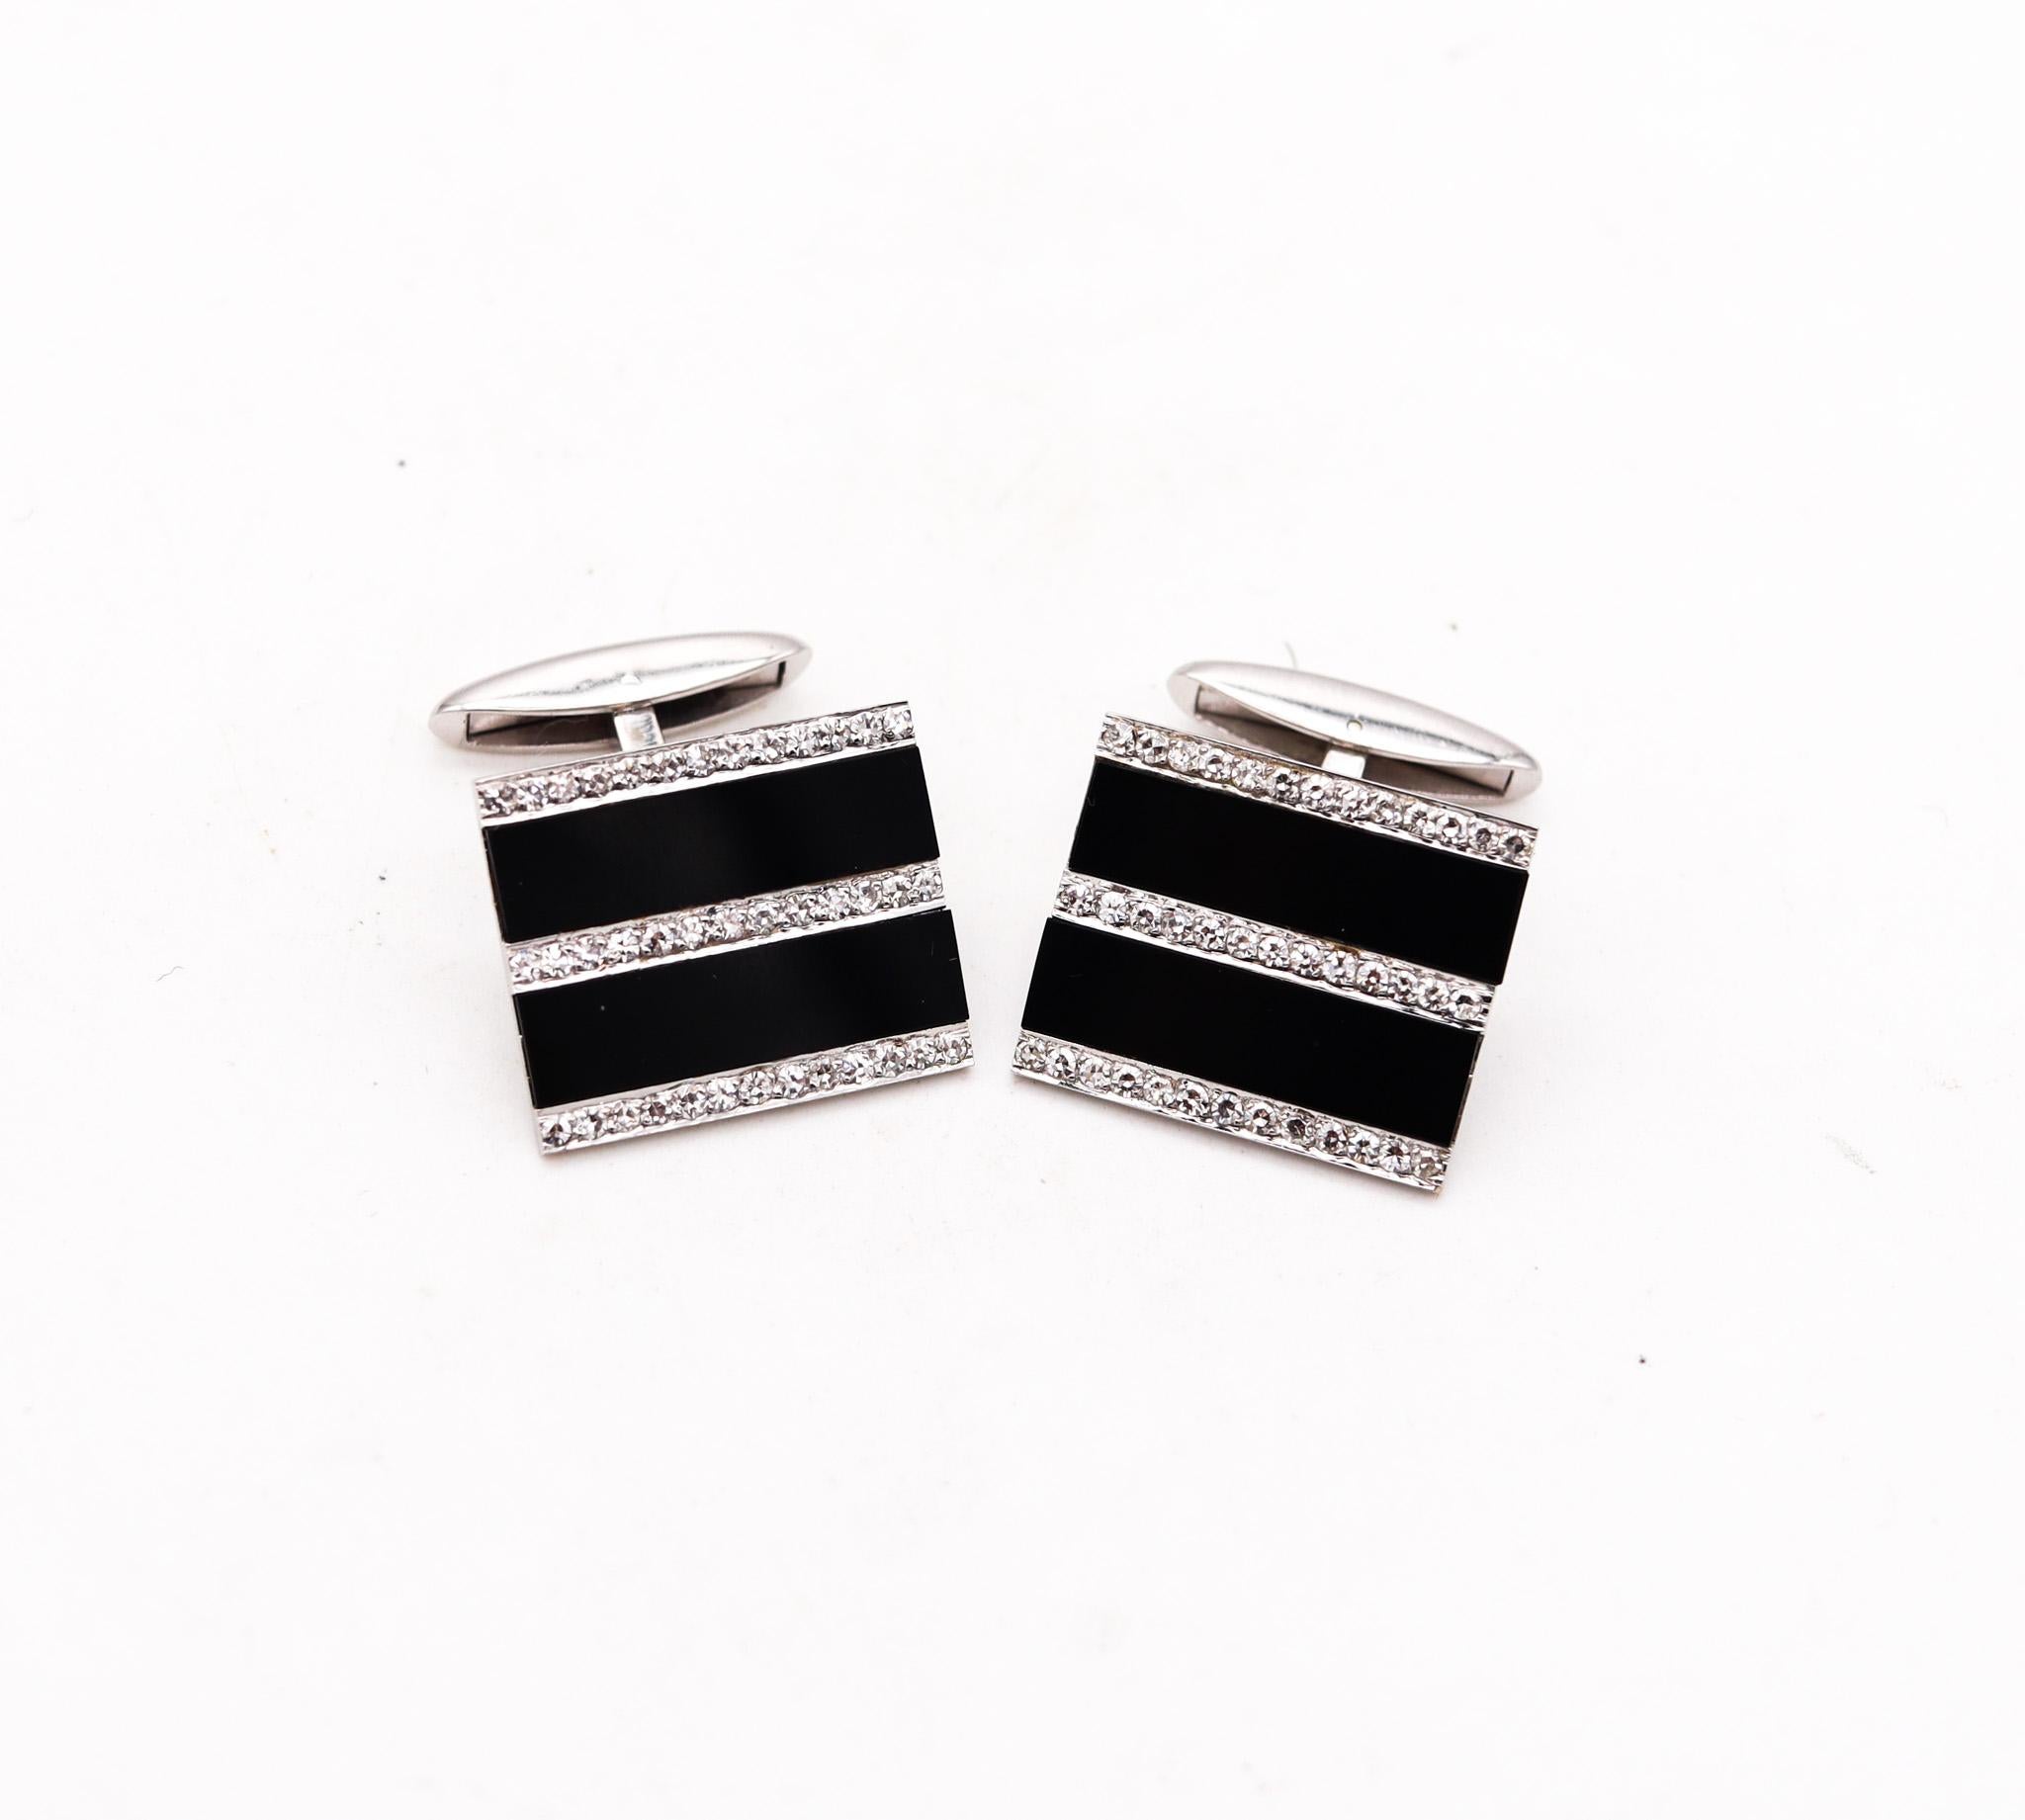 Modernist Kutchinsky London Pair of Cufflinks In 18Kt Gold With 2.34 Ctw Diamonds And Onyx For Sale